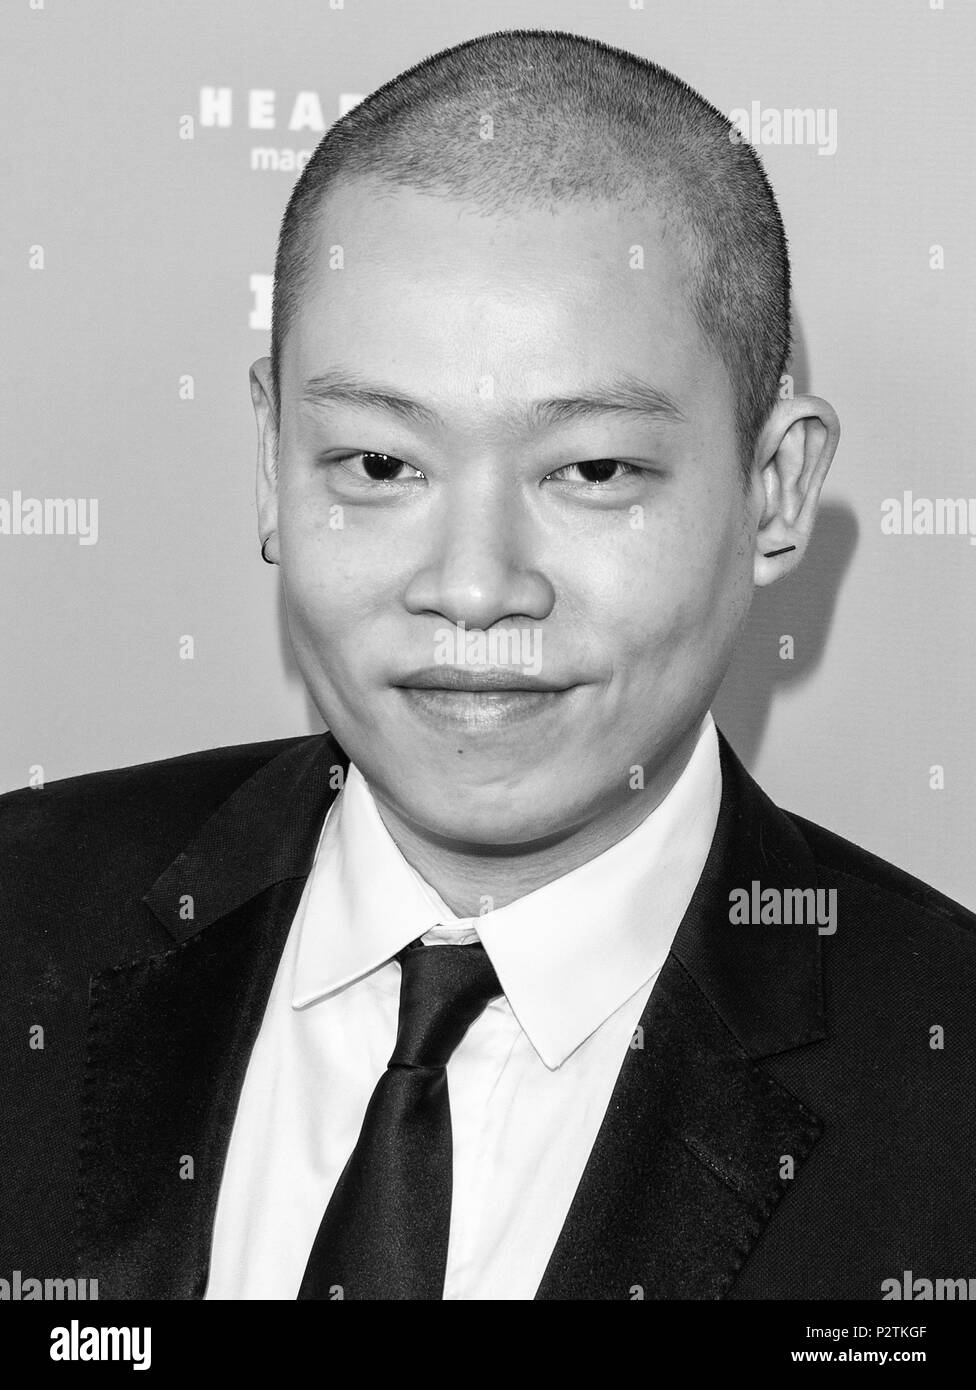 New York, NY - June 12, 2018: Jason Wu attends 2018 Fragrance Foundation Awards at Alice Tully Hall at Lincoln Center Stock Photo